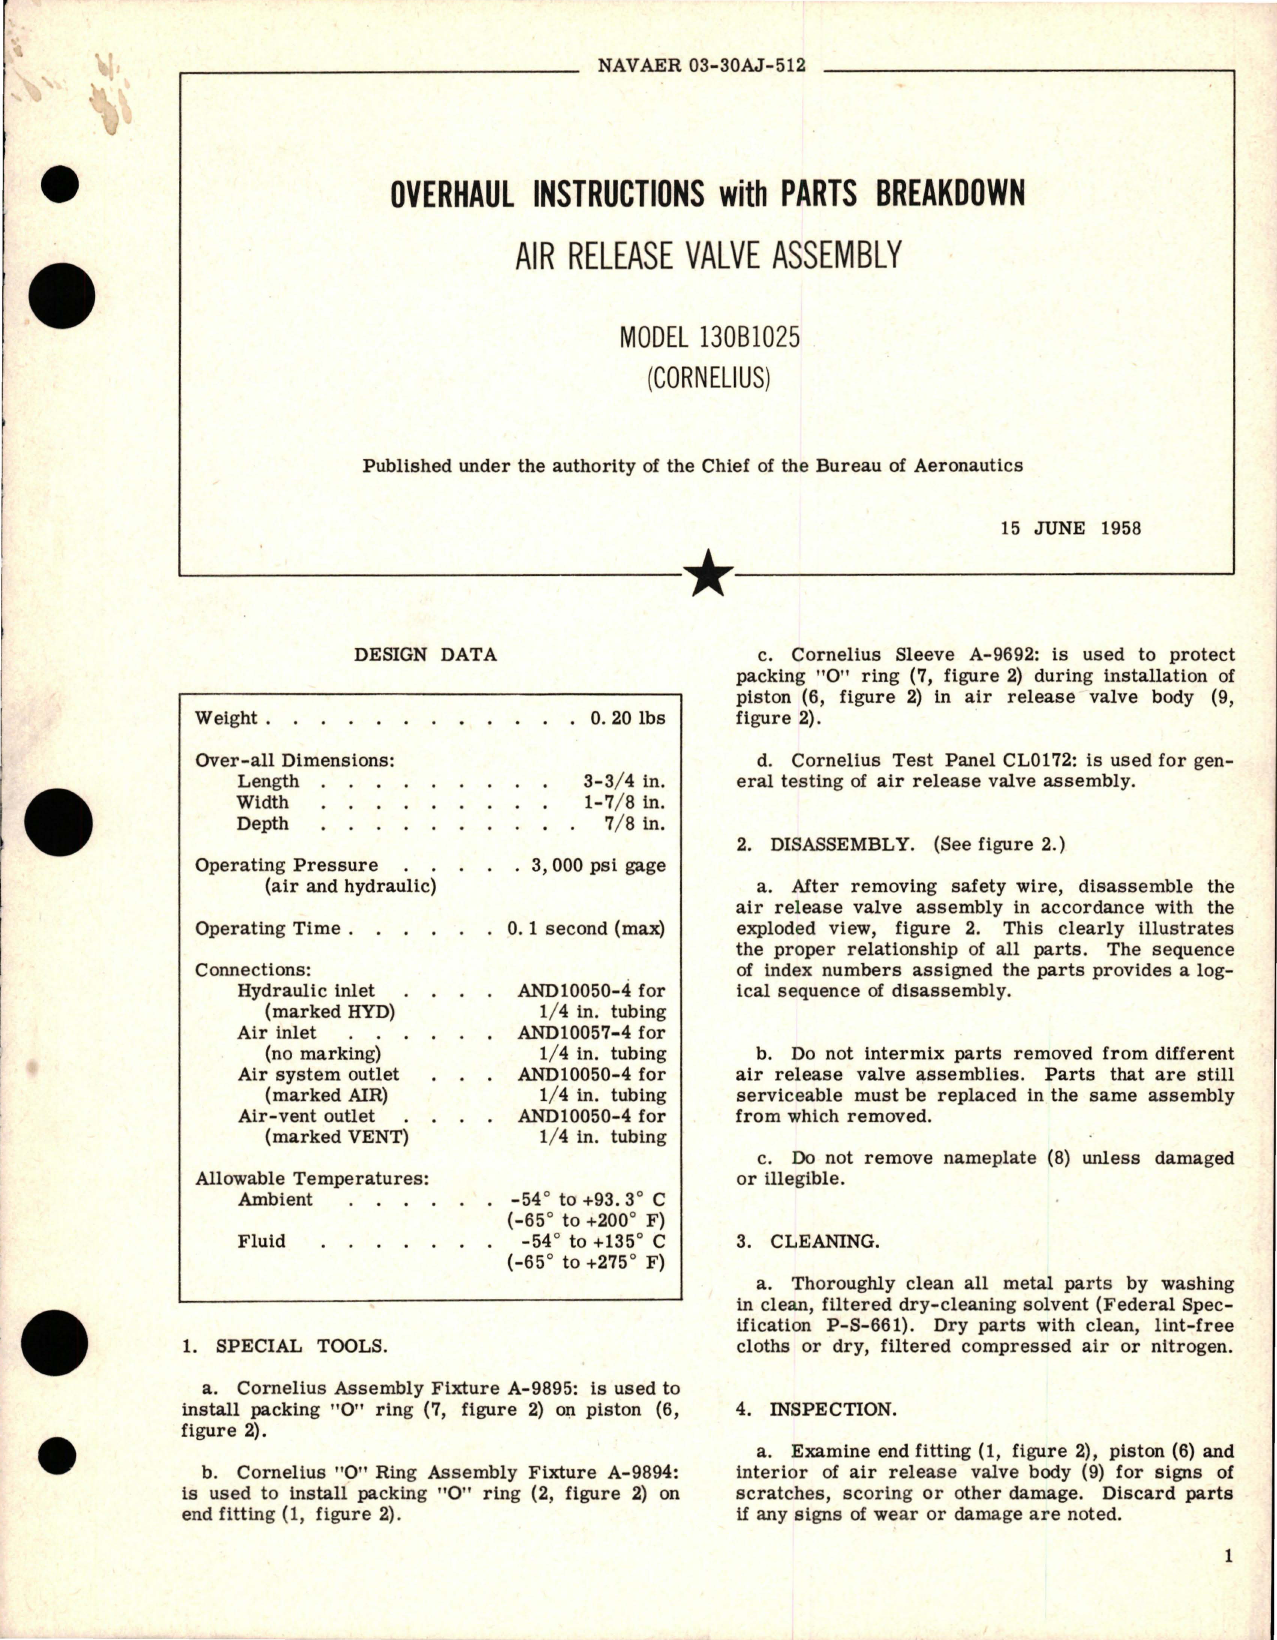 Sample page 1 from AirCorps Library document: Overhaul Instructions with Parts Breakdown for Air Release Valve Assembly - Model 130B1025